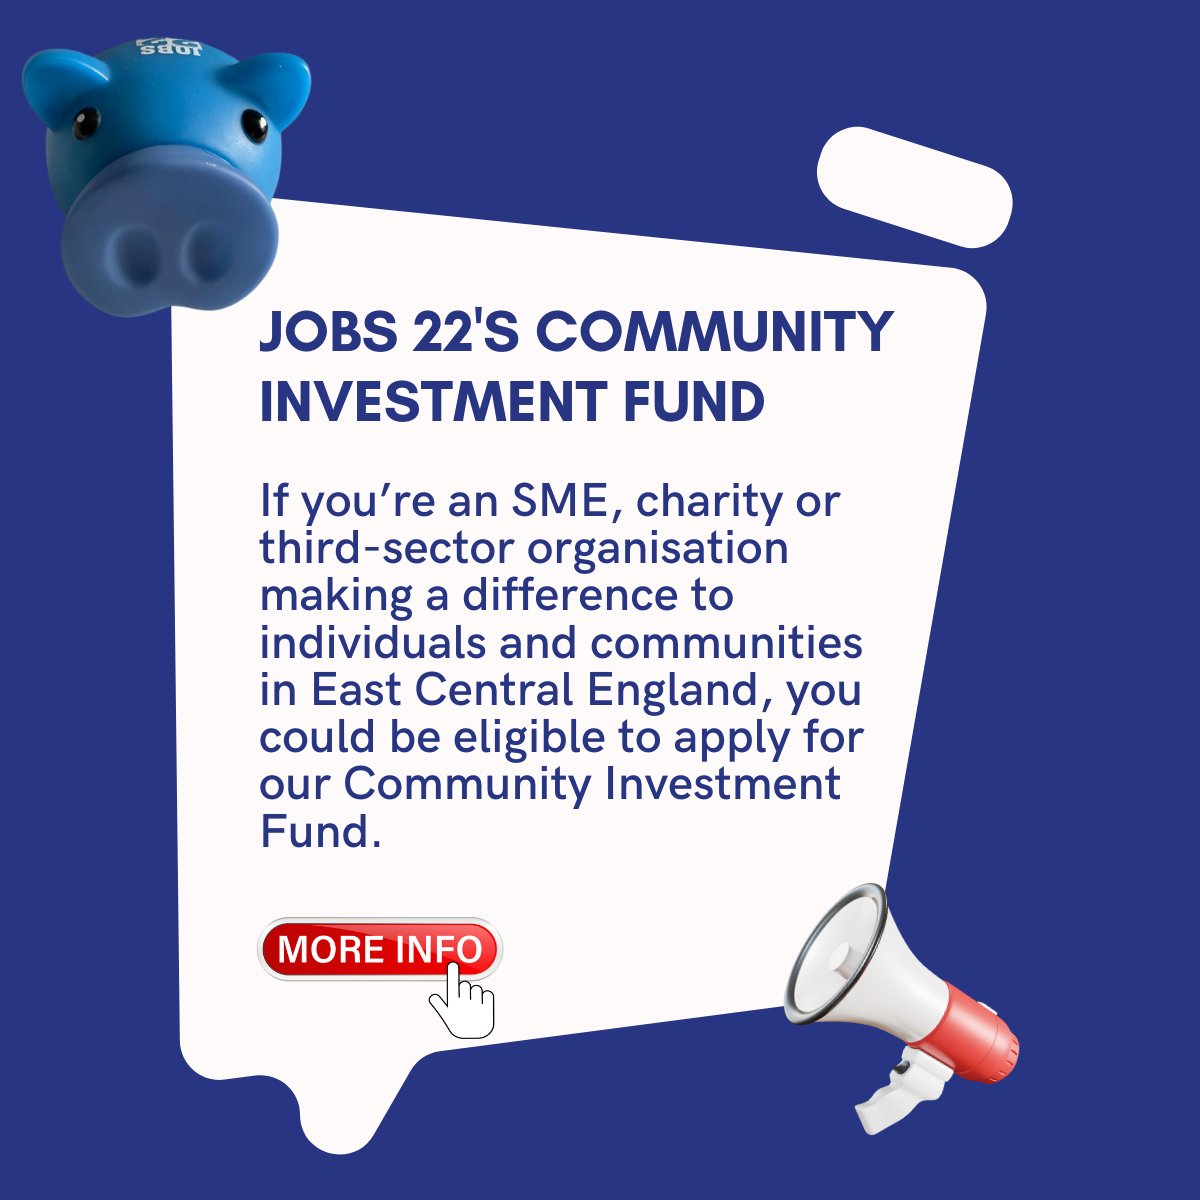 Are you an SME, charity, or third-sector organisation making waves in East Central England? Our Community Investment Fund is here to support your mission and help you deliver more social value jobs-22.co.uk/cif #communityinvestmentfund #restartscheme #jobs22